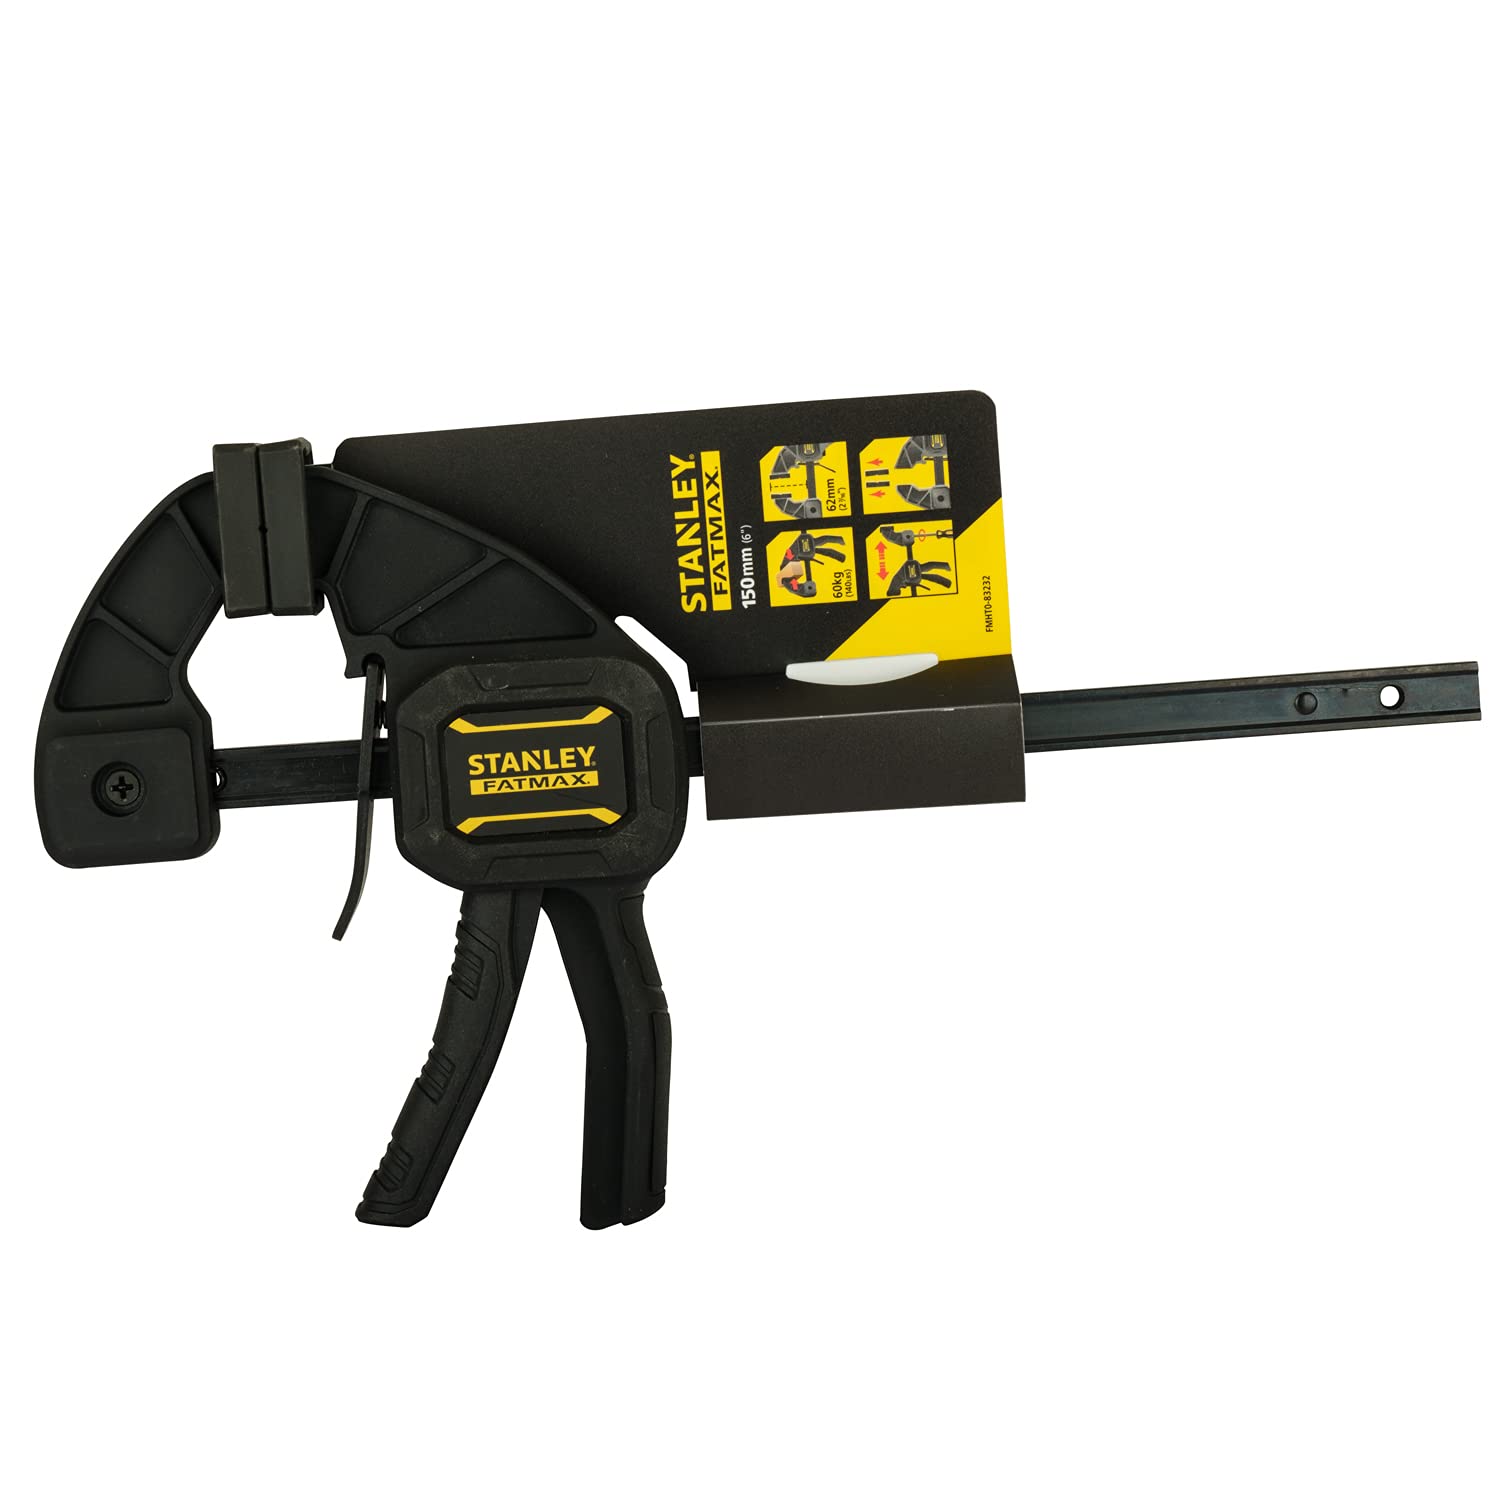 STANLEY FMHT0 FATMAX Trigger Clamp